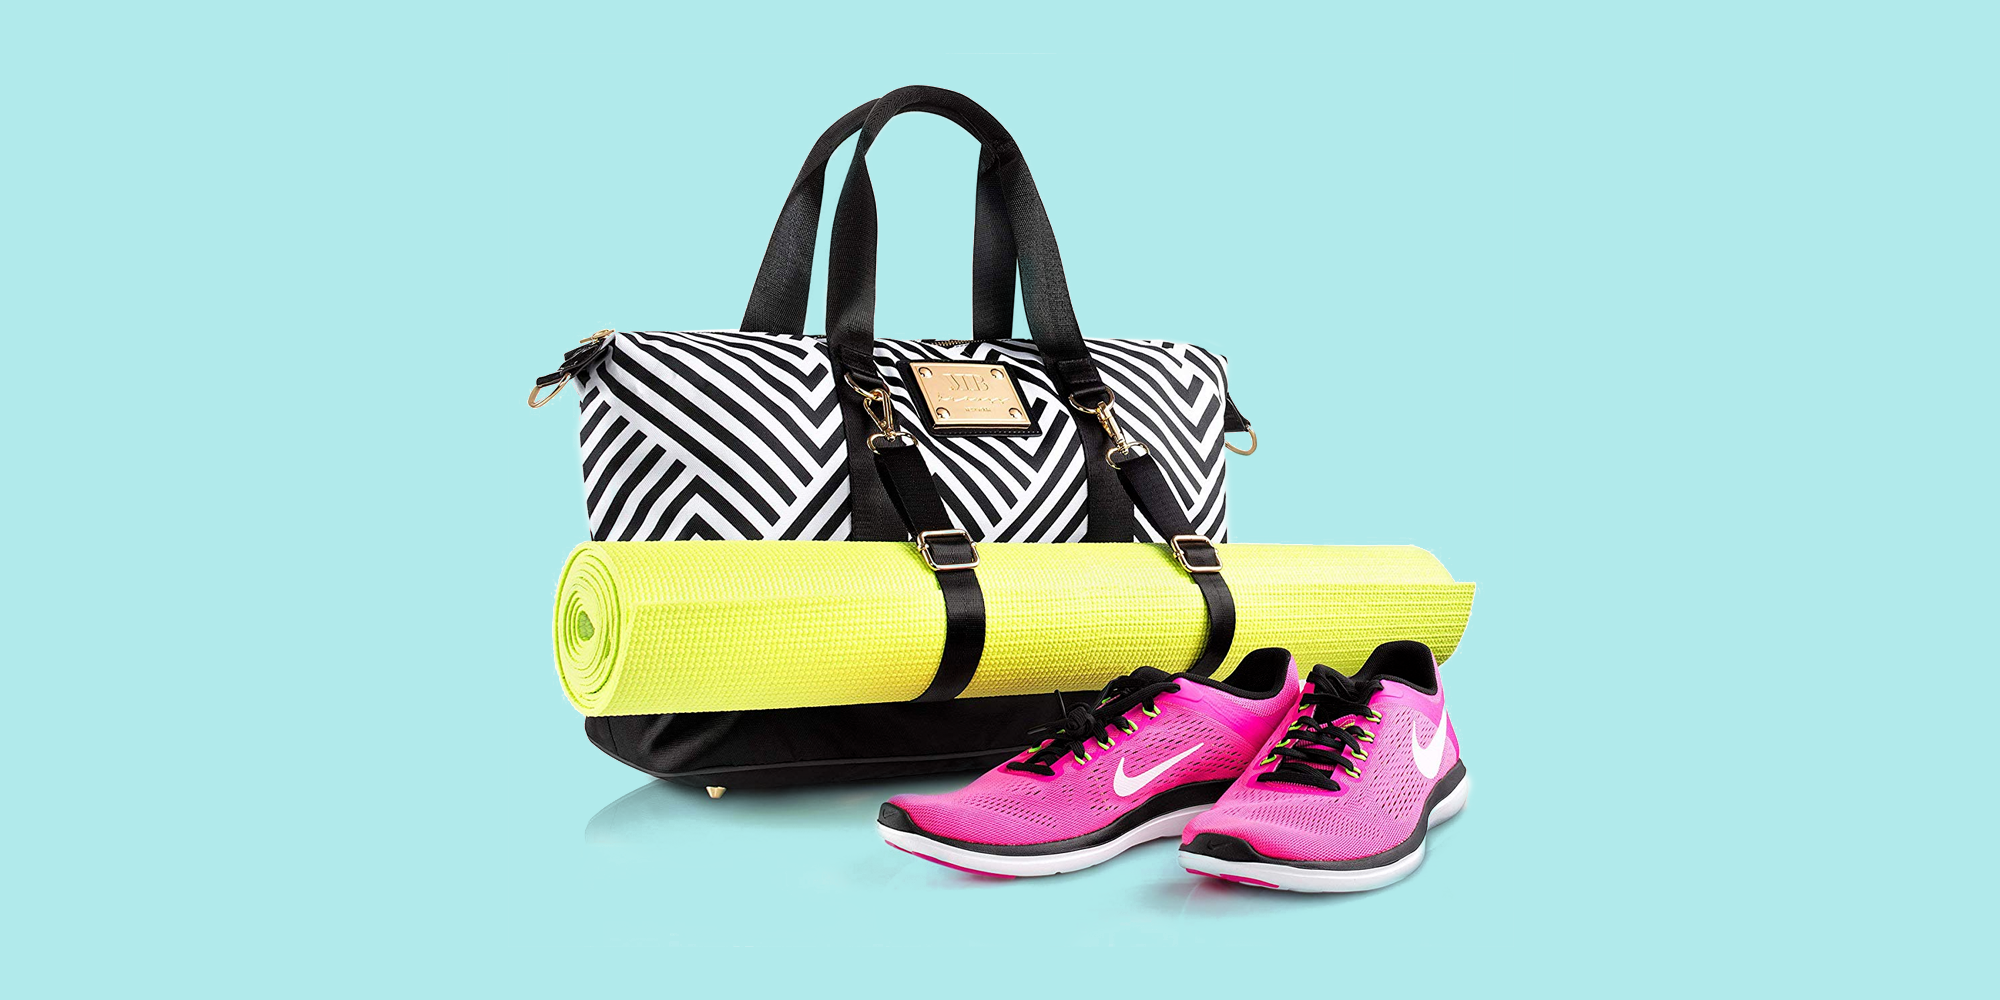 The Best Gym Tote Bags, According to Customer Reviews